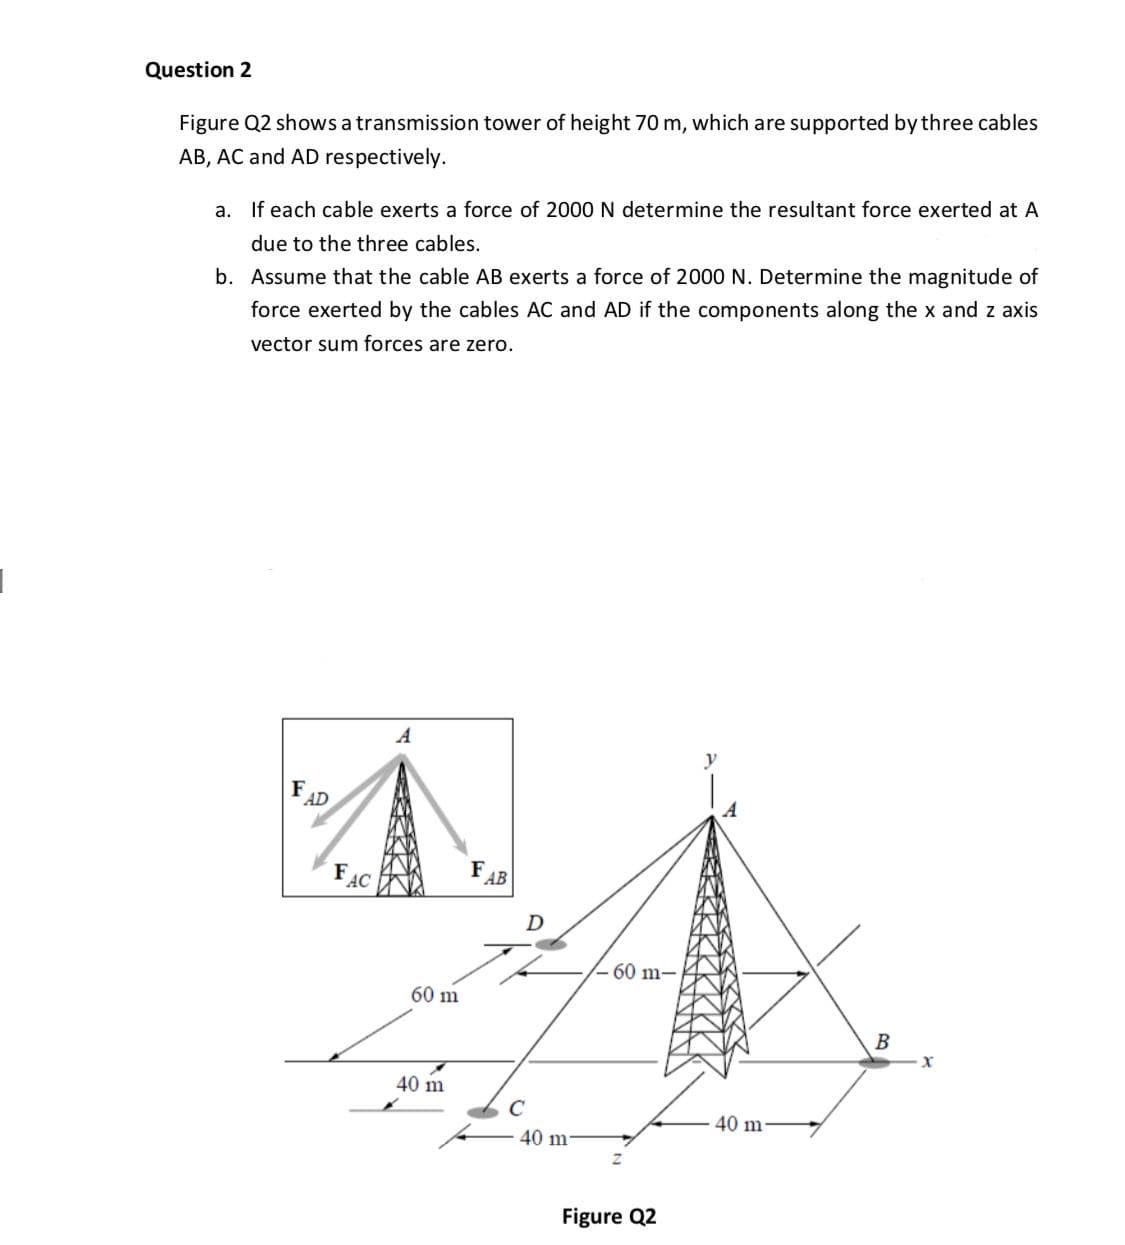 Figure Q2 shows a transmission tower of height 70 m, which are supported by three cables
AB, AC and AD respectively.
a. If each cable exerts a force of 2000N determine the resultant force exerted at A
due to the three cables.
b. Assume that the cable AB exerts a force of 2000 N. Determine the magnitude of
force exerted by the cables AC and AD if the components along the x and z axis
vector sum forces are zero.
